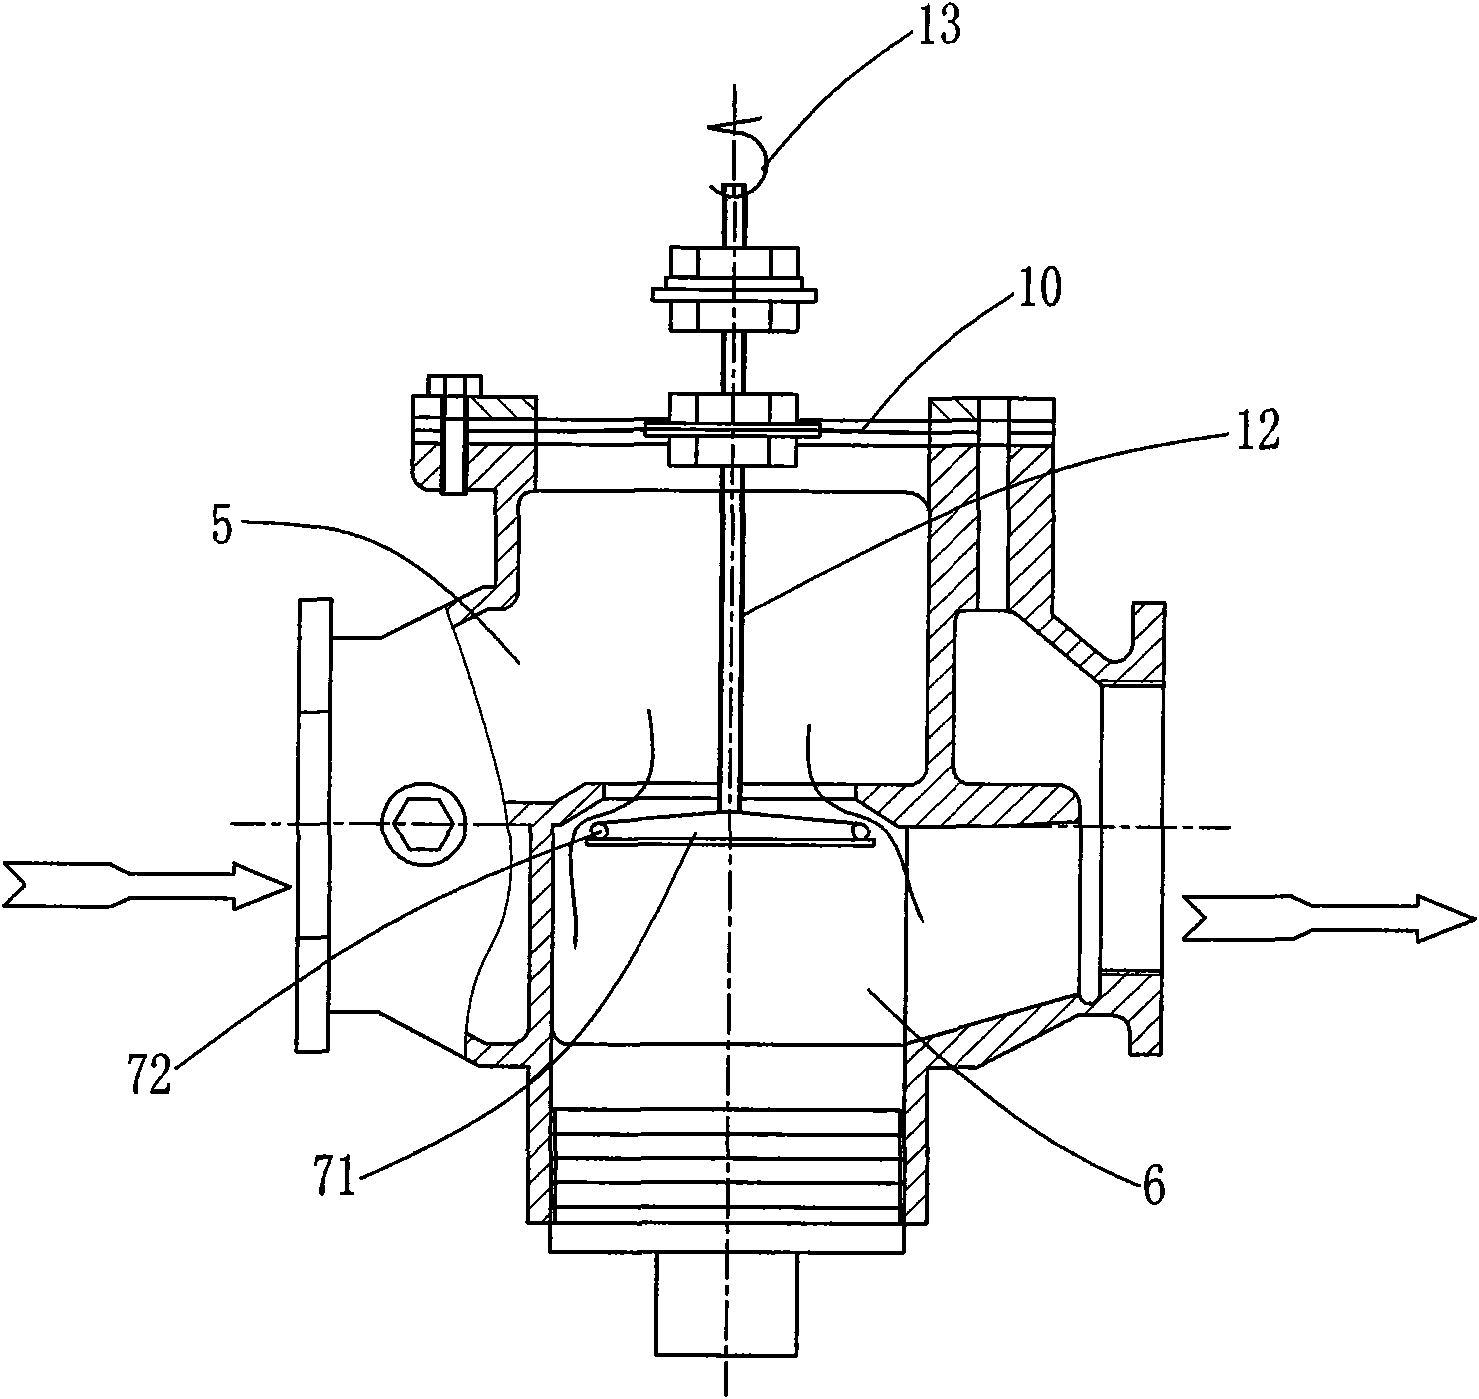 Regulating valve for proportioning air and fuel gas